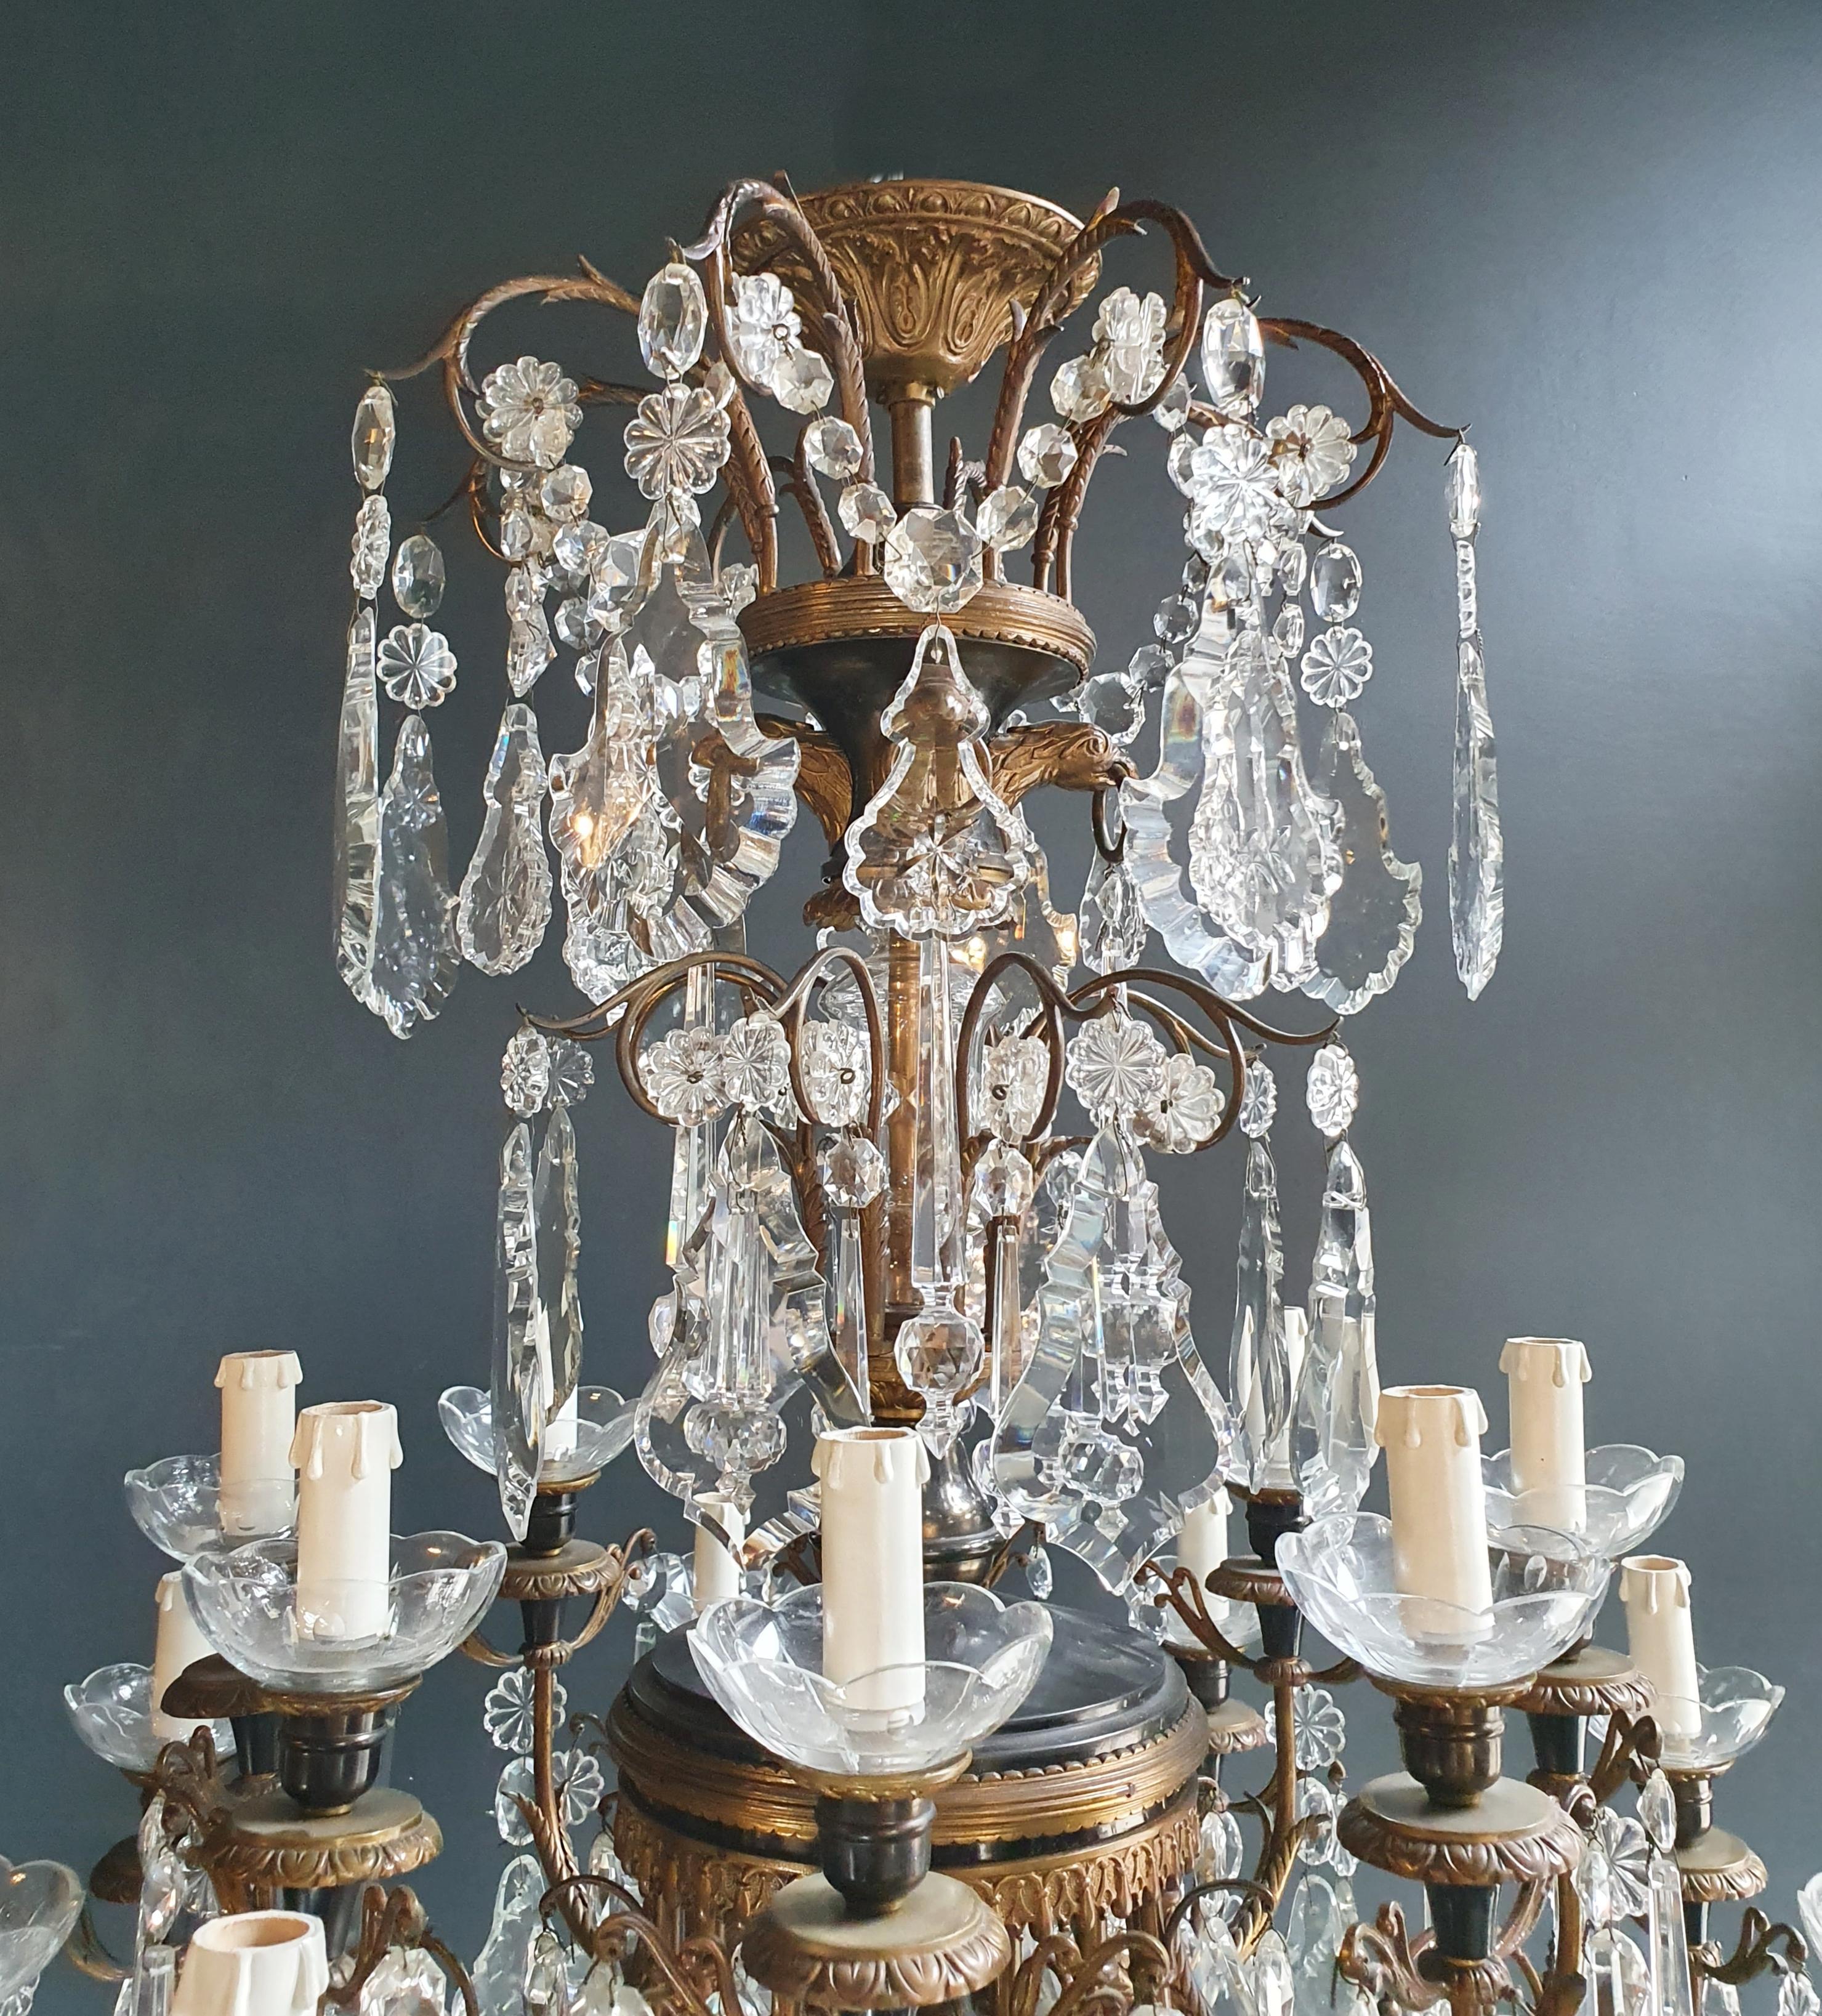 Brass crystal chandelier antique ceiling lamp lustre Art Nouveau lamp

Measures: Total height 130 cm, height without chain 90 cm, diameter 76 cm. Weight (approximately) 25 kg.

Number of lights: 16-light bulb sockets: E14
Material: Brass,